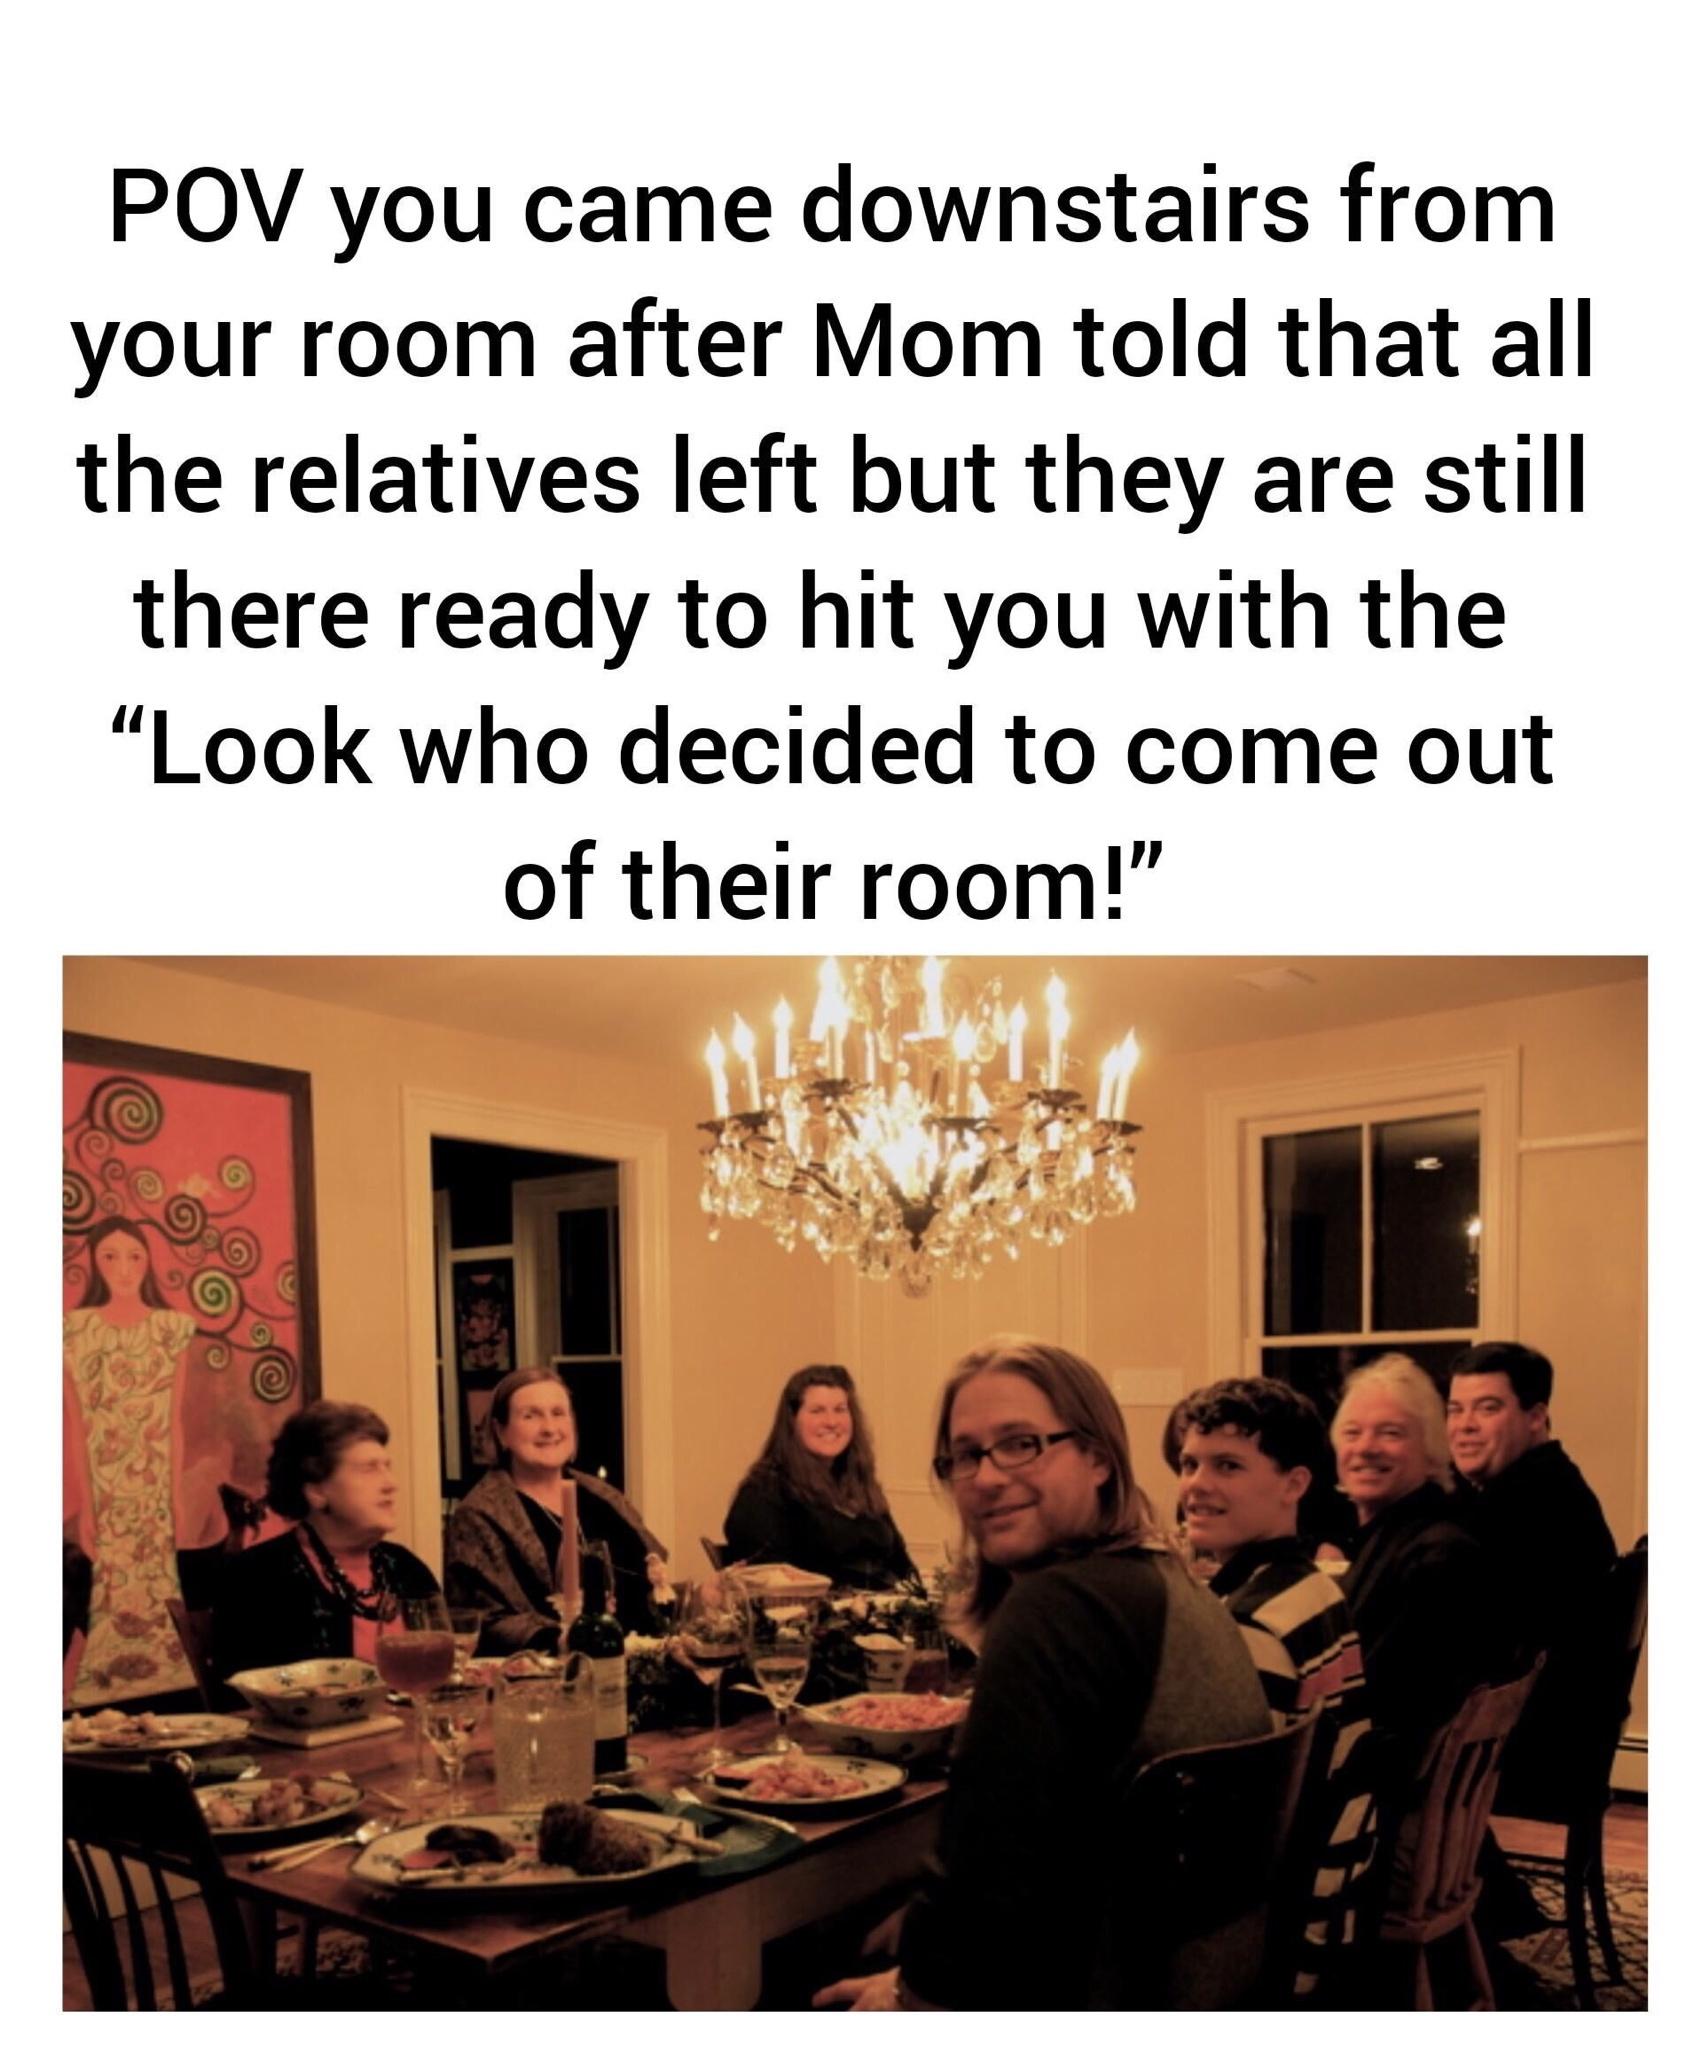 presentation - Pov you came downstairs from your room after Mom told that all the relatives left but they are still there ready to hit you with the "Look who decided to come out of their room!"